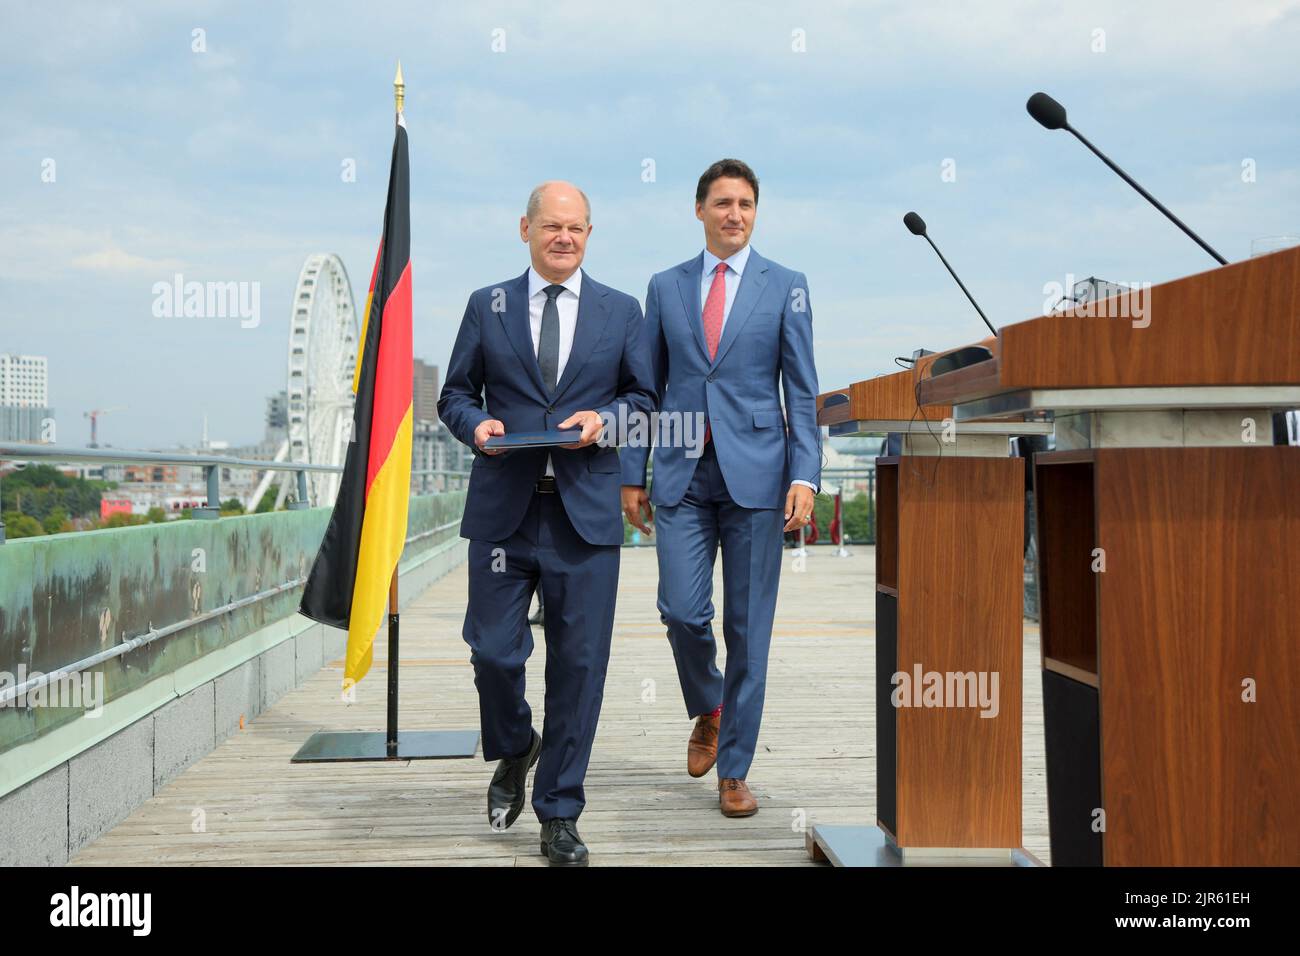 Germany's Chancellor Olaf Scholz and Canada's Prime Minister Justin Trudeau attend to speak to the media in Montreal, Quebec, Canada August 22, 2022. REUTERS/Christinne Muschi Stock Photo